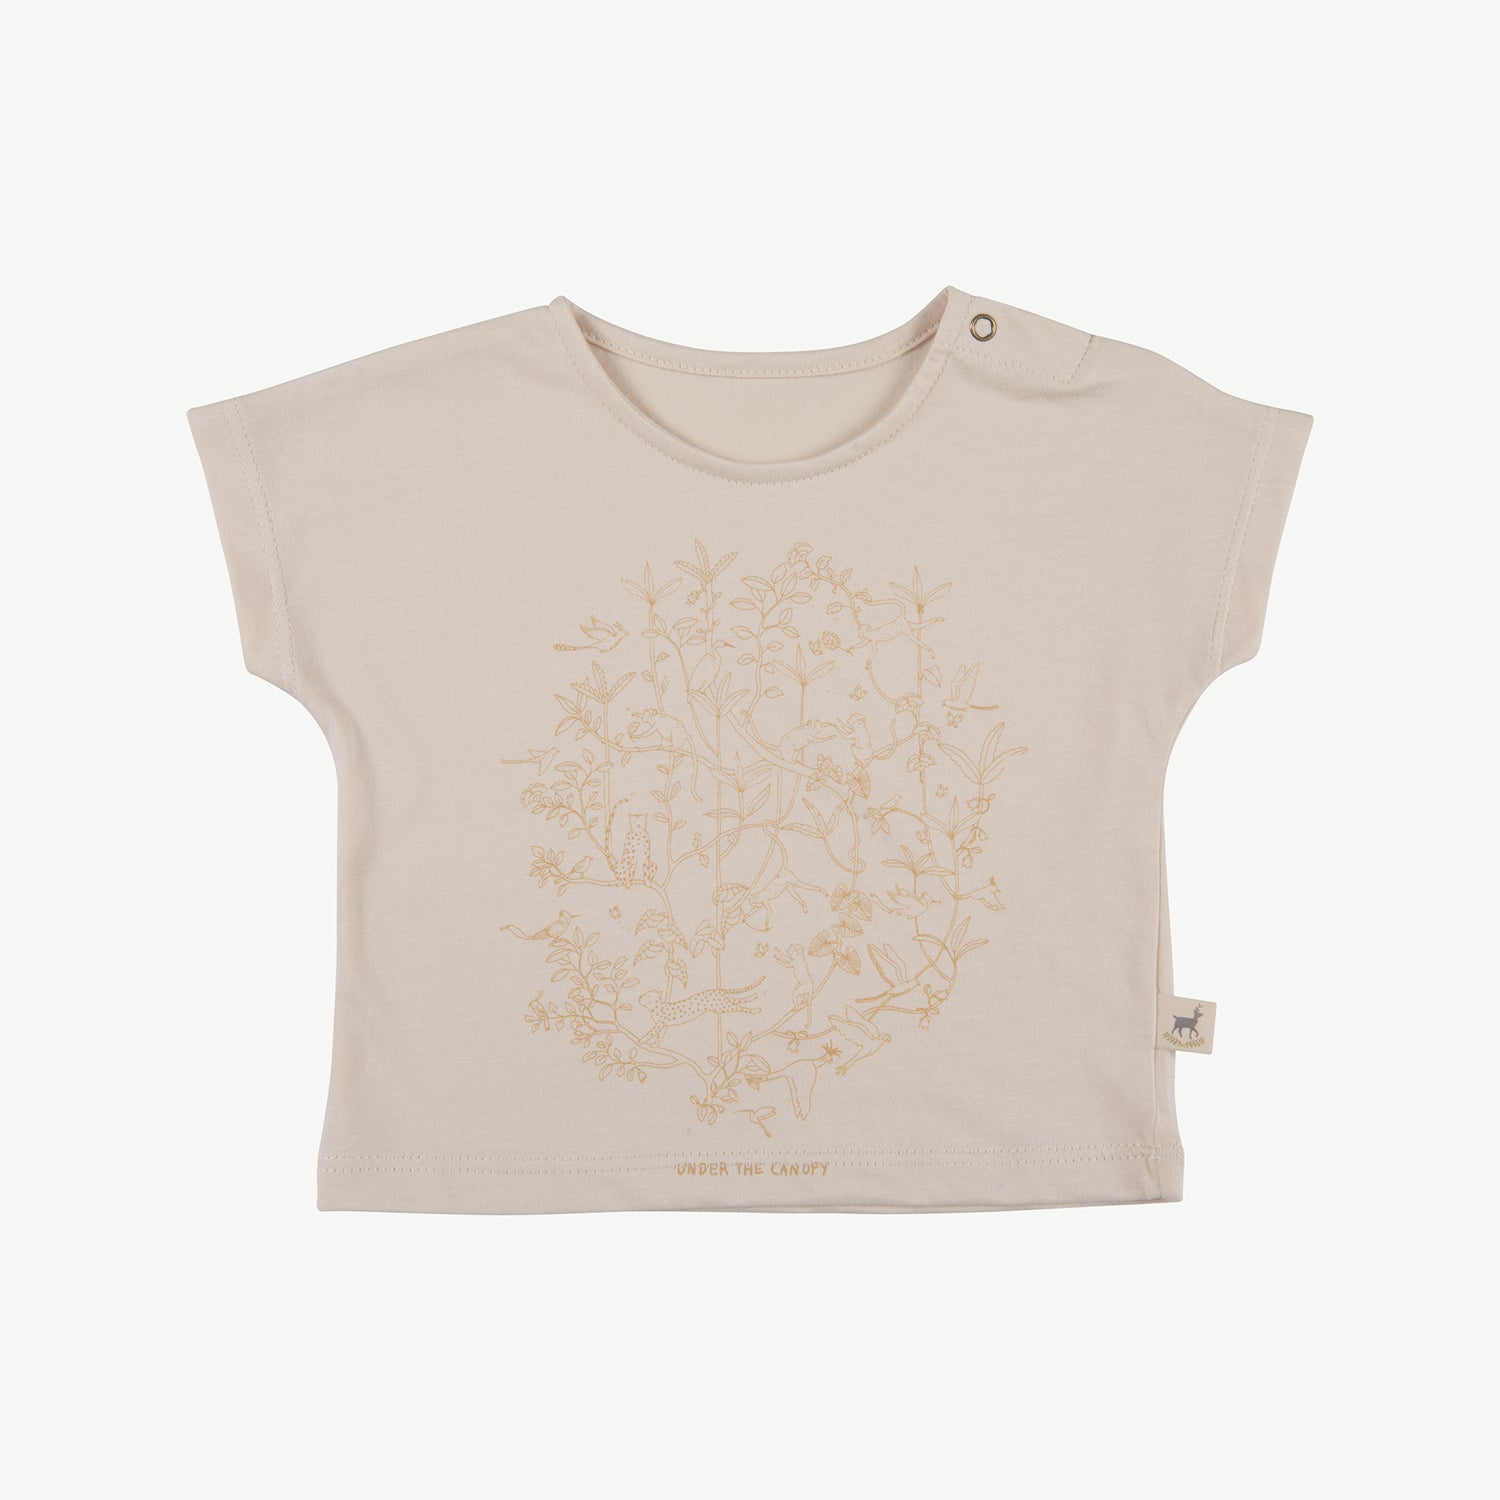 'under the canopy' pink tint t-shirt